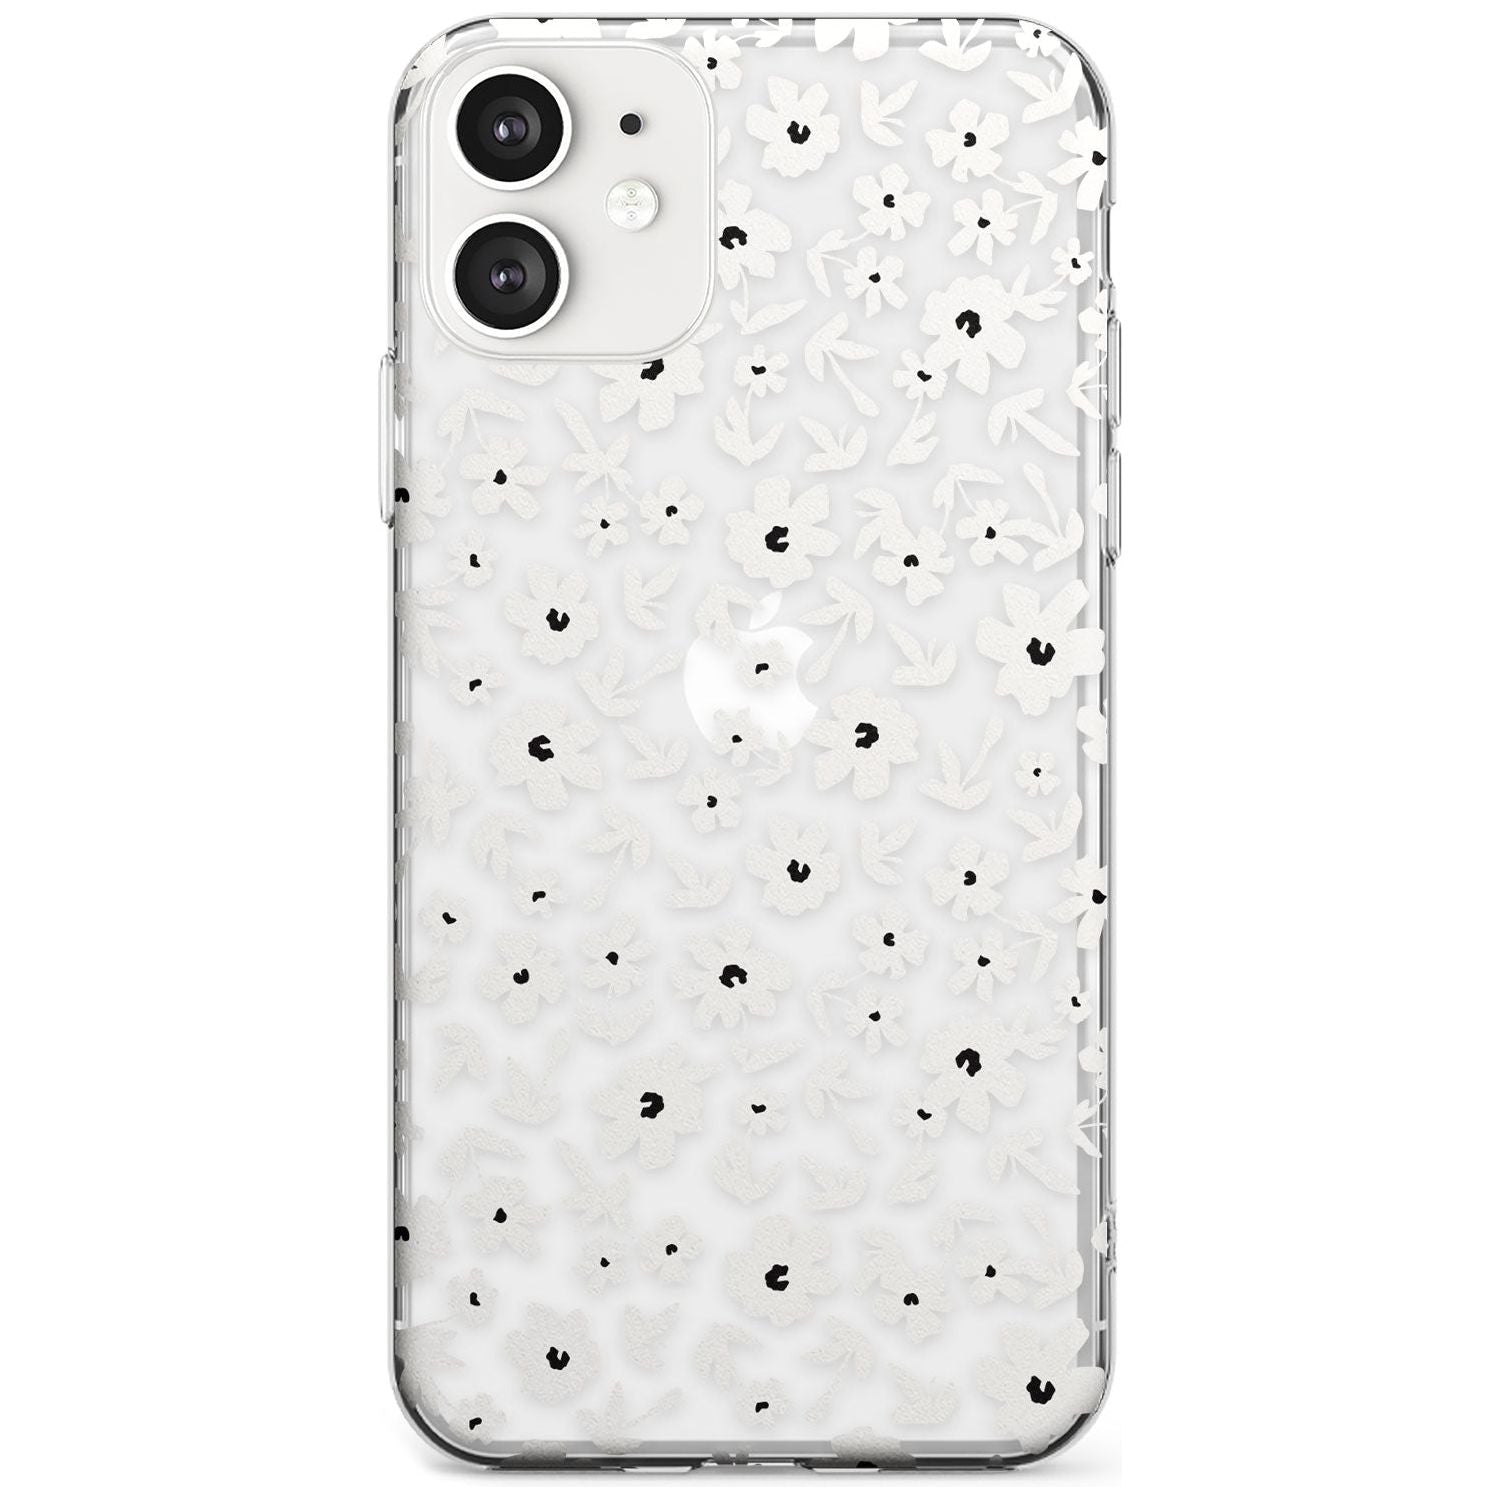 Floral Print on Clear - Cute Floral Design Black Impact Phone Case for iPhone 11